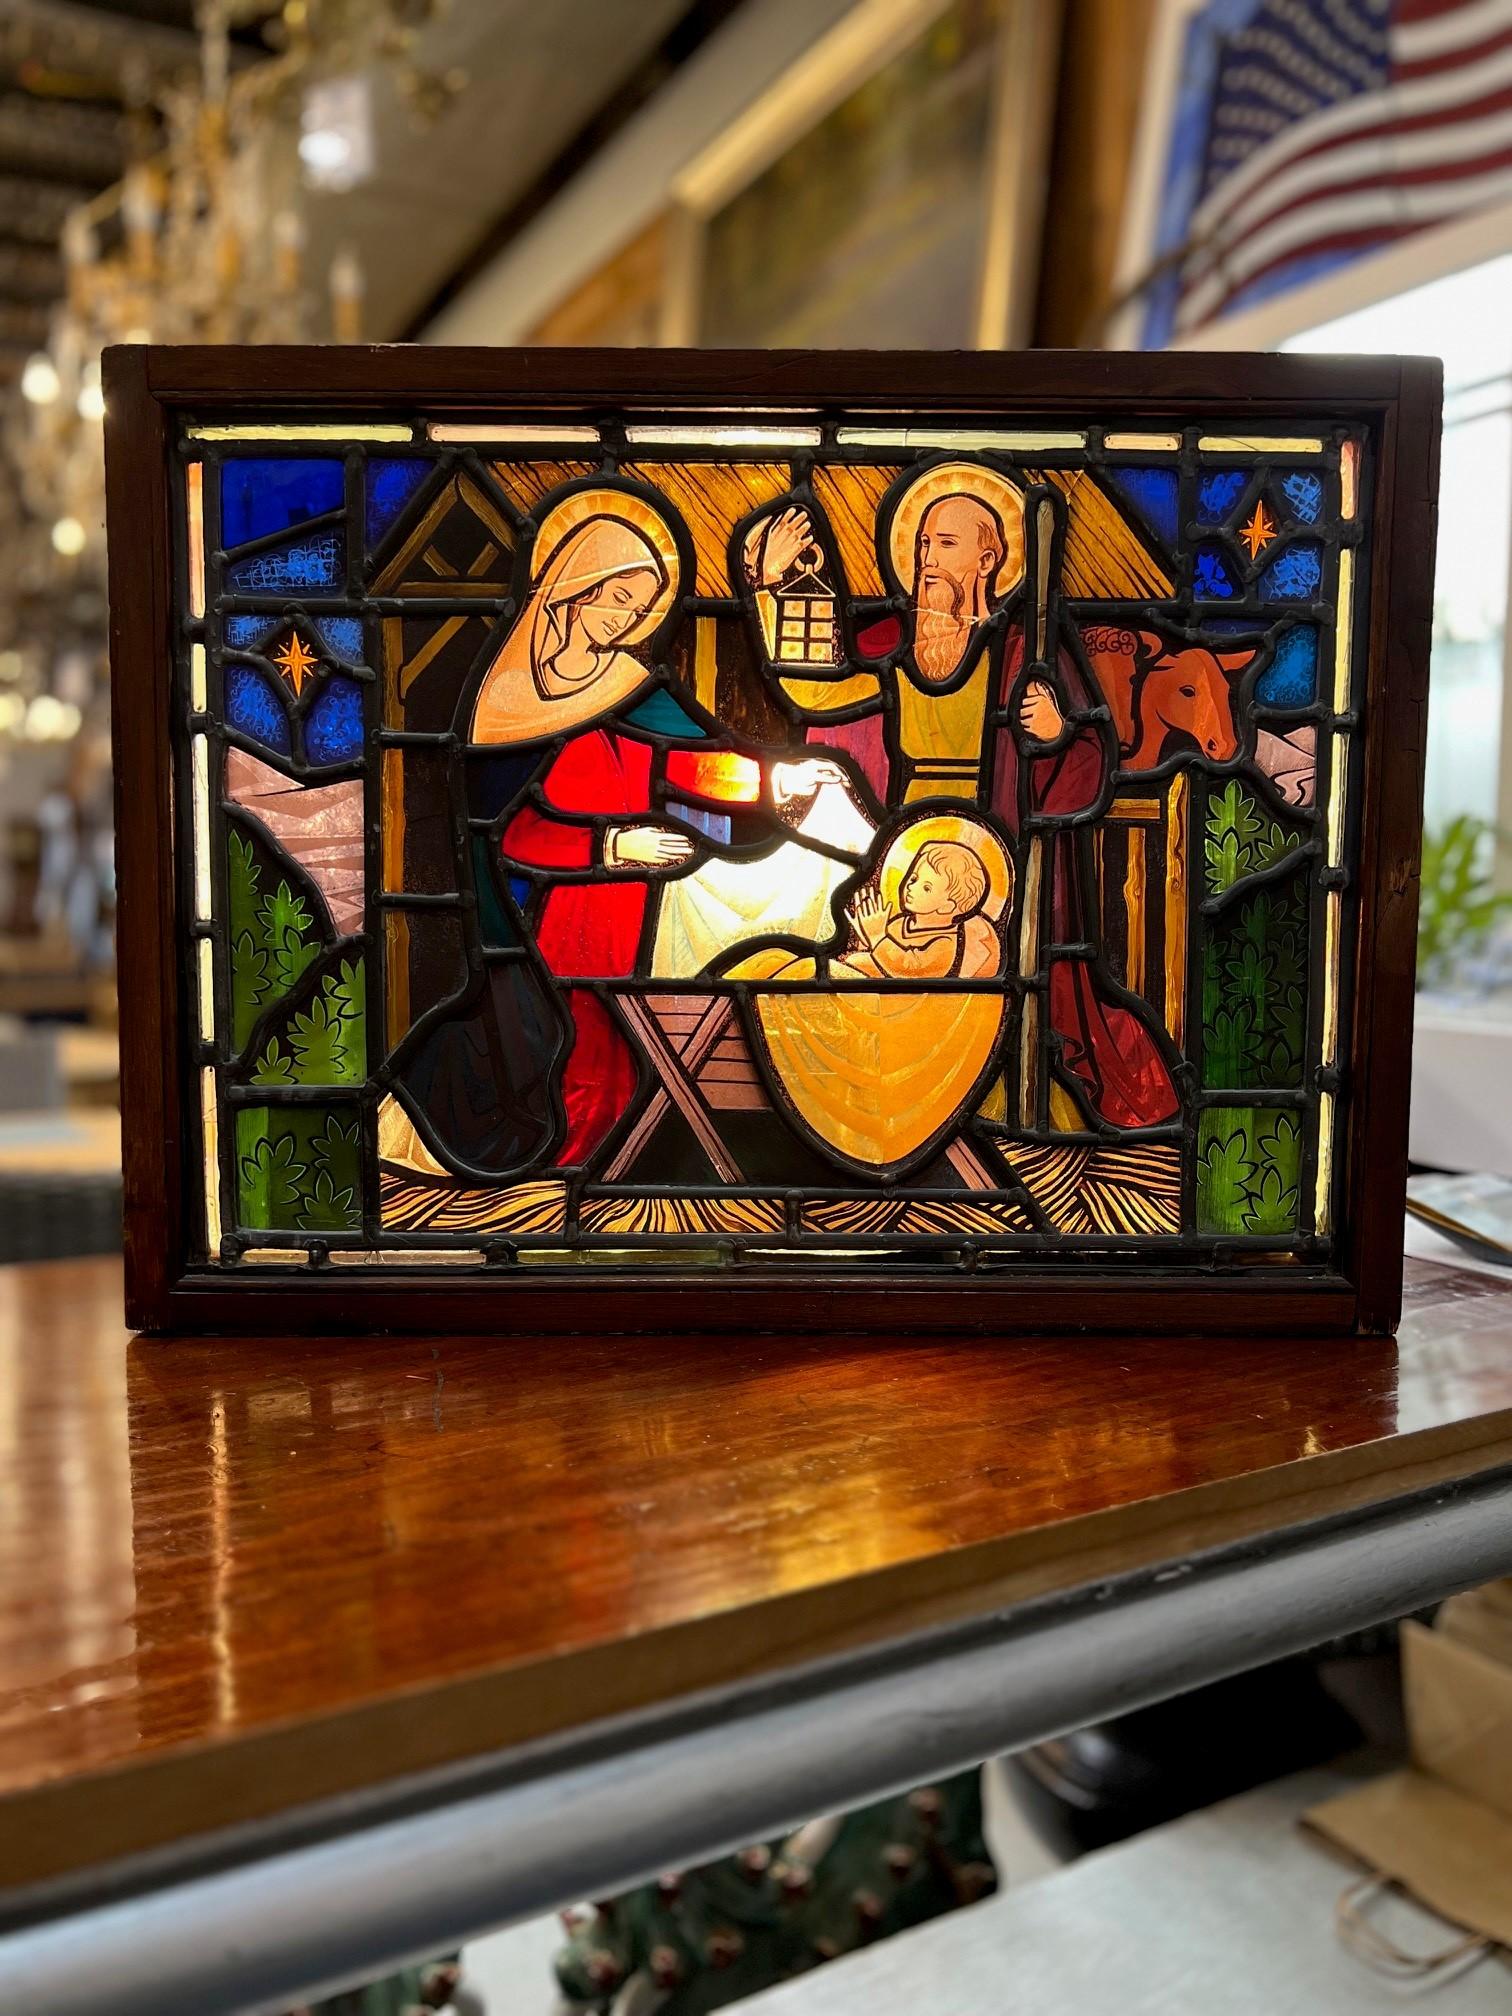 Early 20th century ( maybe older ) antique stained glass window of The Nativity in a shadow box with lights, a great piece. This is a beautiful window full of colors representing the birth of Jesus in a manger. The Nativity of Jesus has been a major